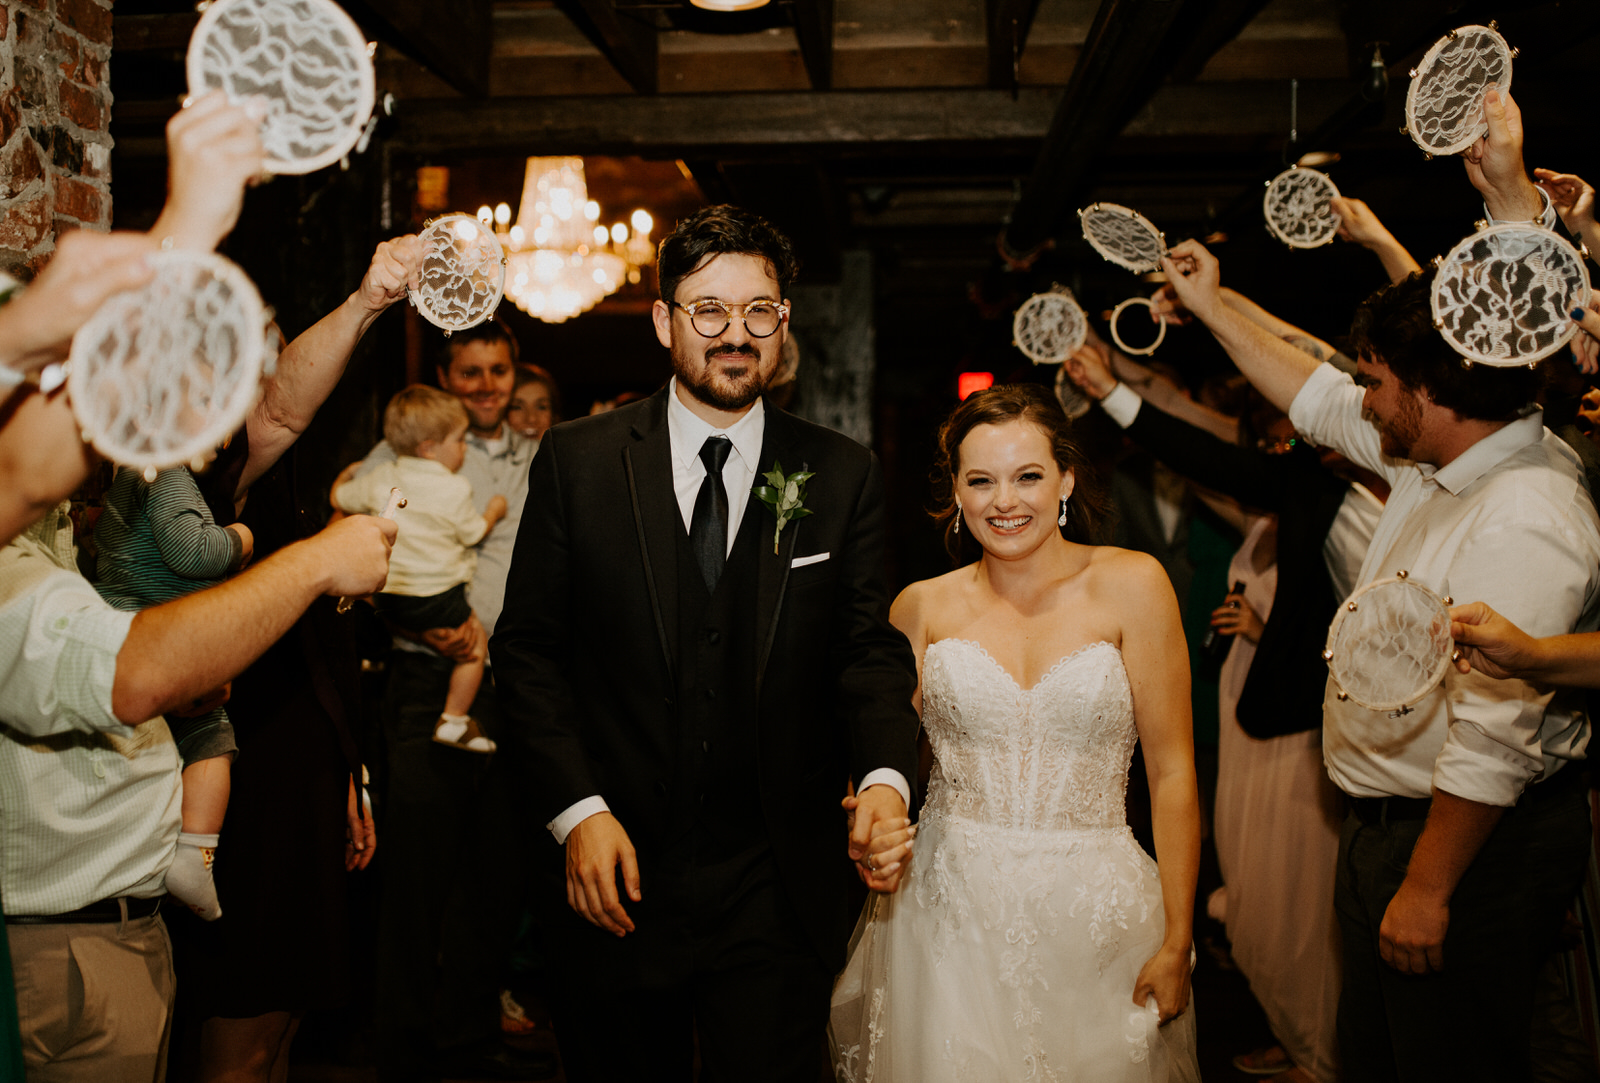 Wedding exit photo: Romantic Nashville Wedding at The Bedford featured on Nashville Bride Guide